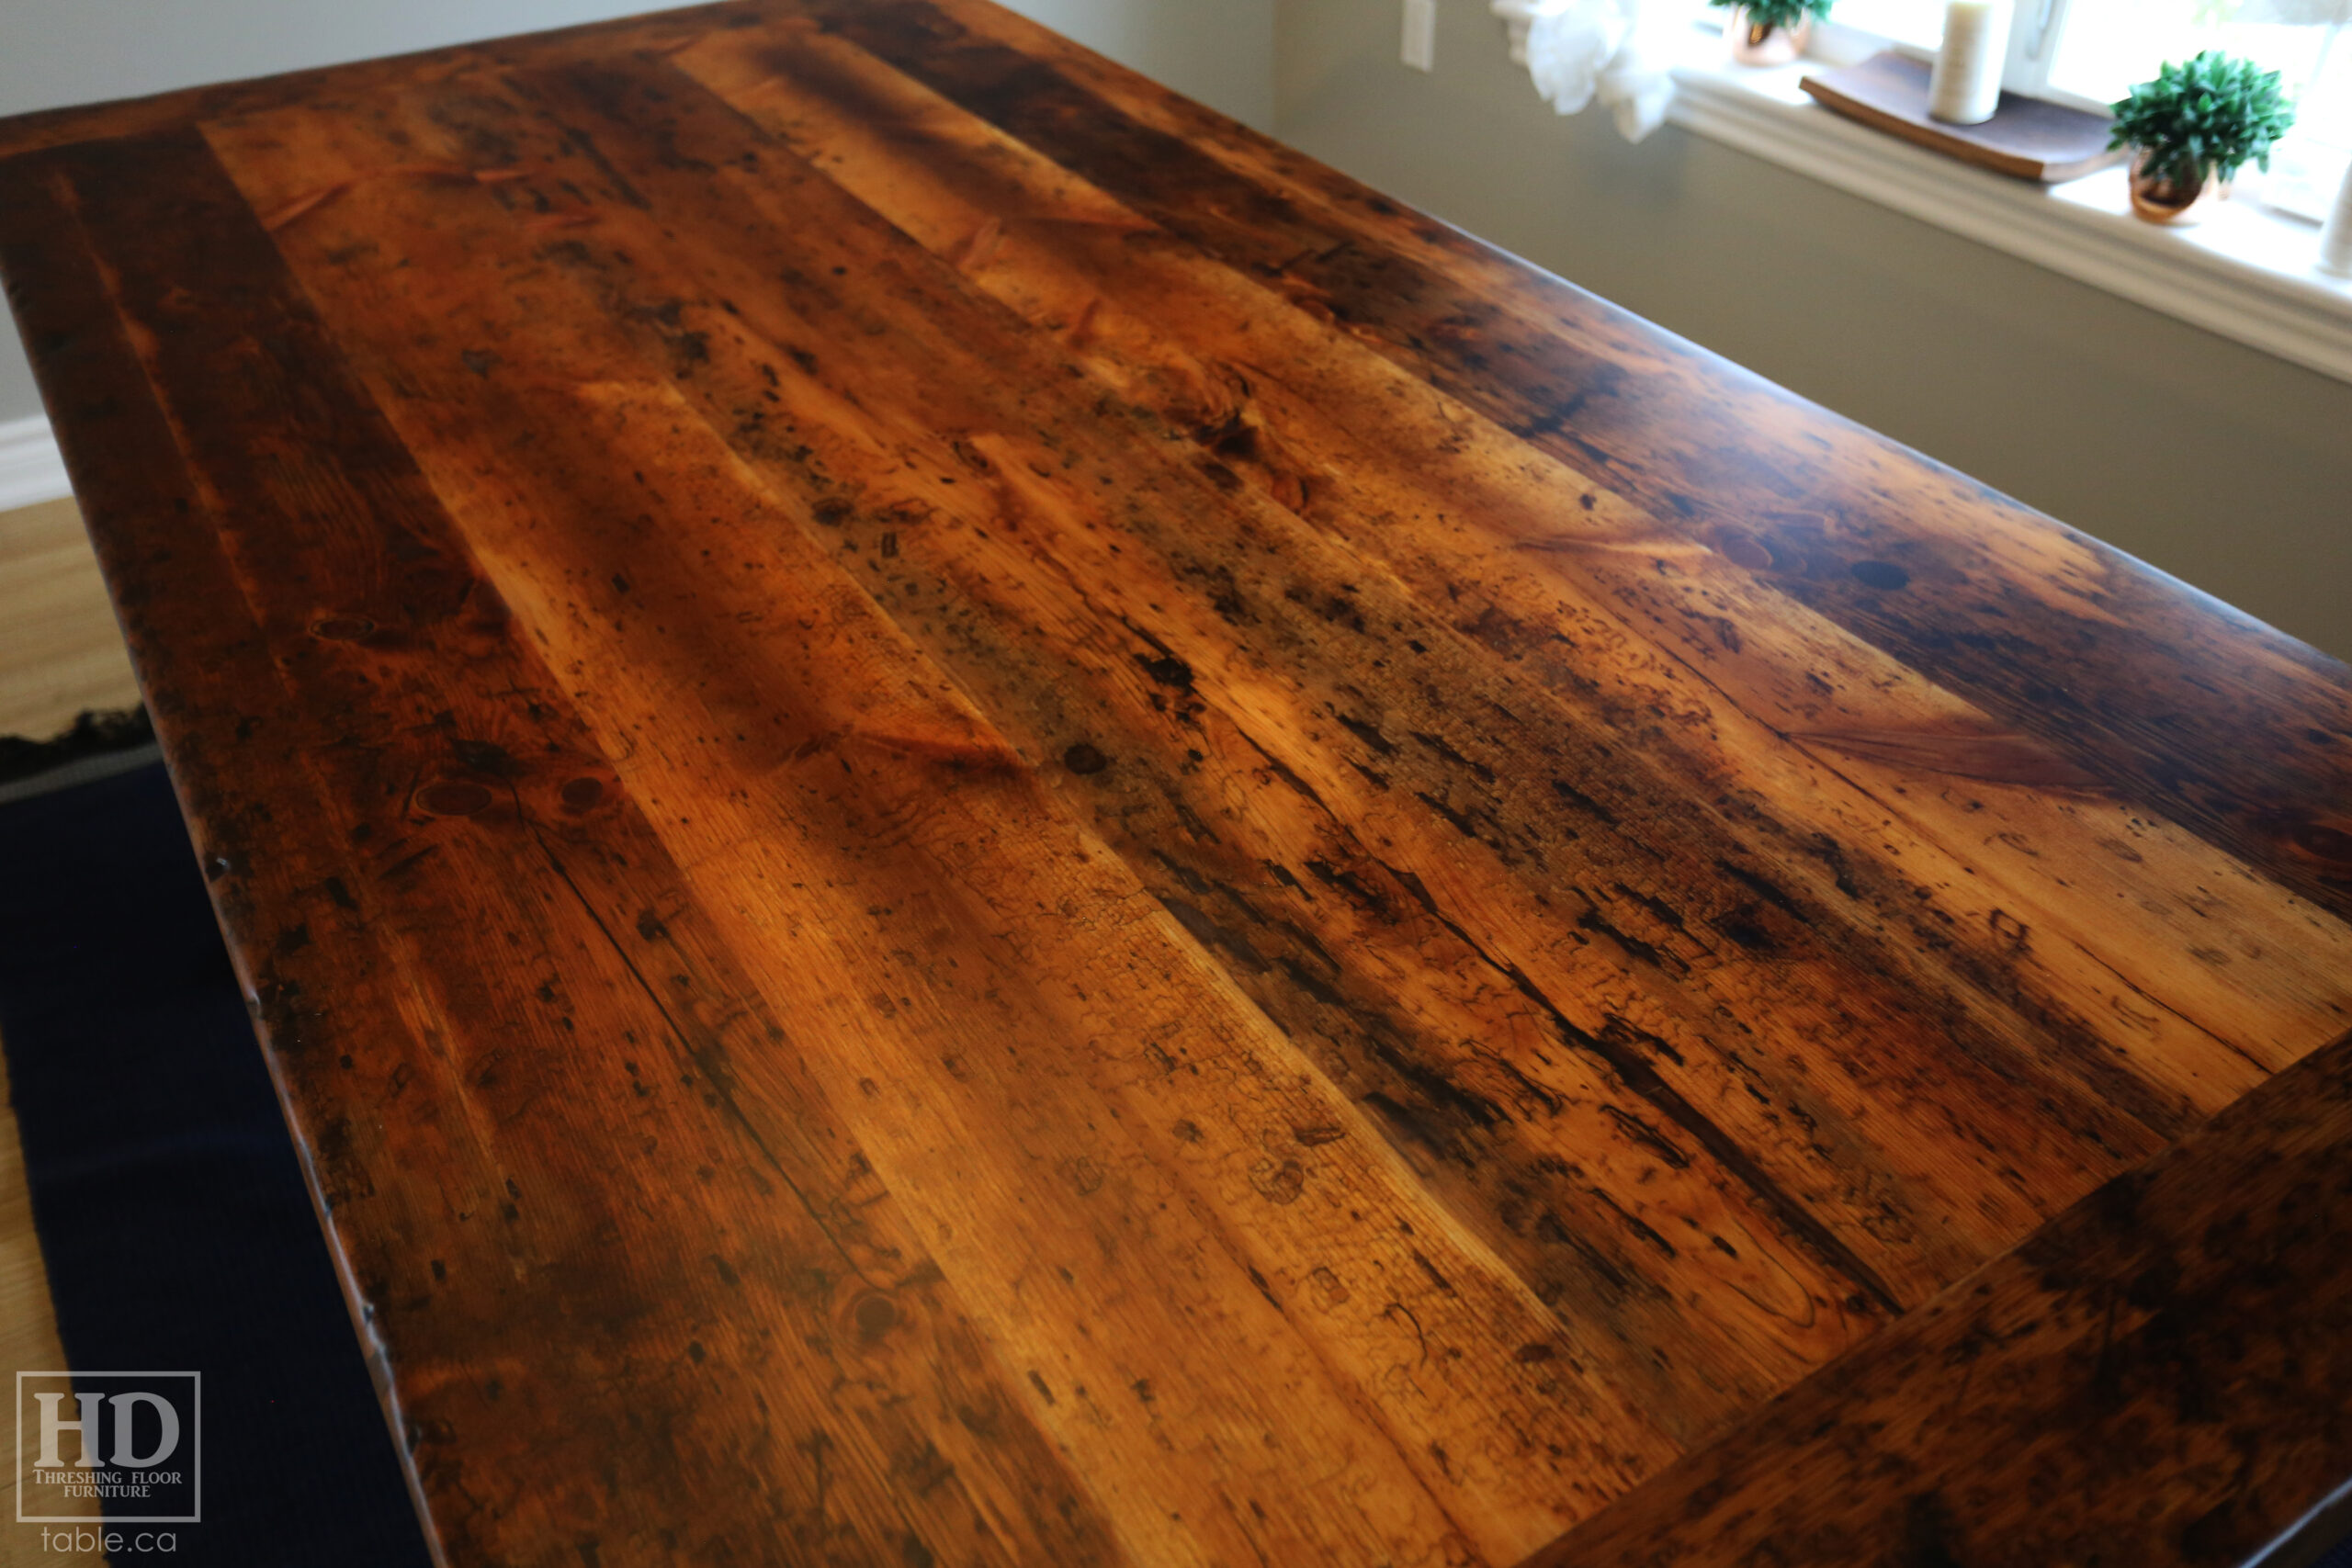 Ontario Made Reclaimed Wood Table by HD Threshing Floor Furniture / www.table.ca